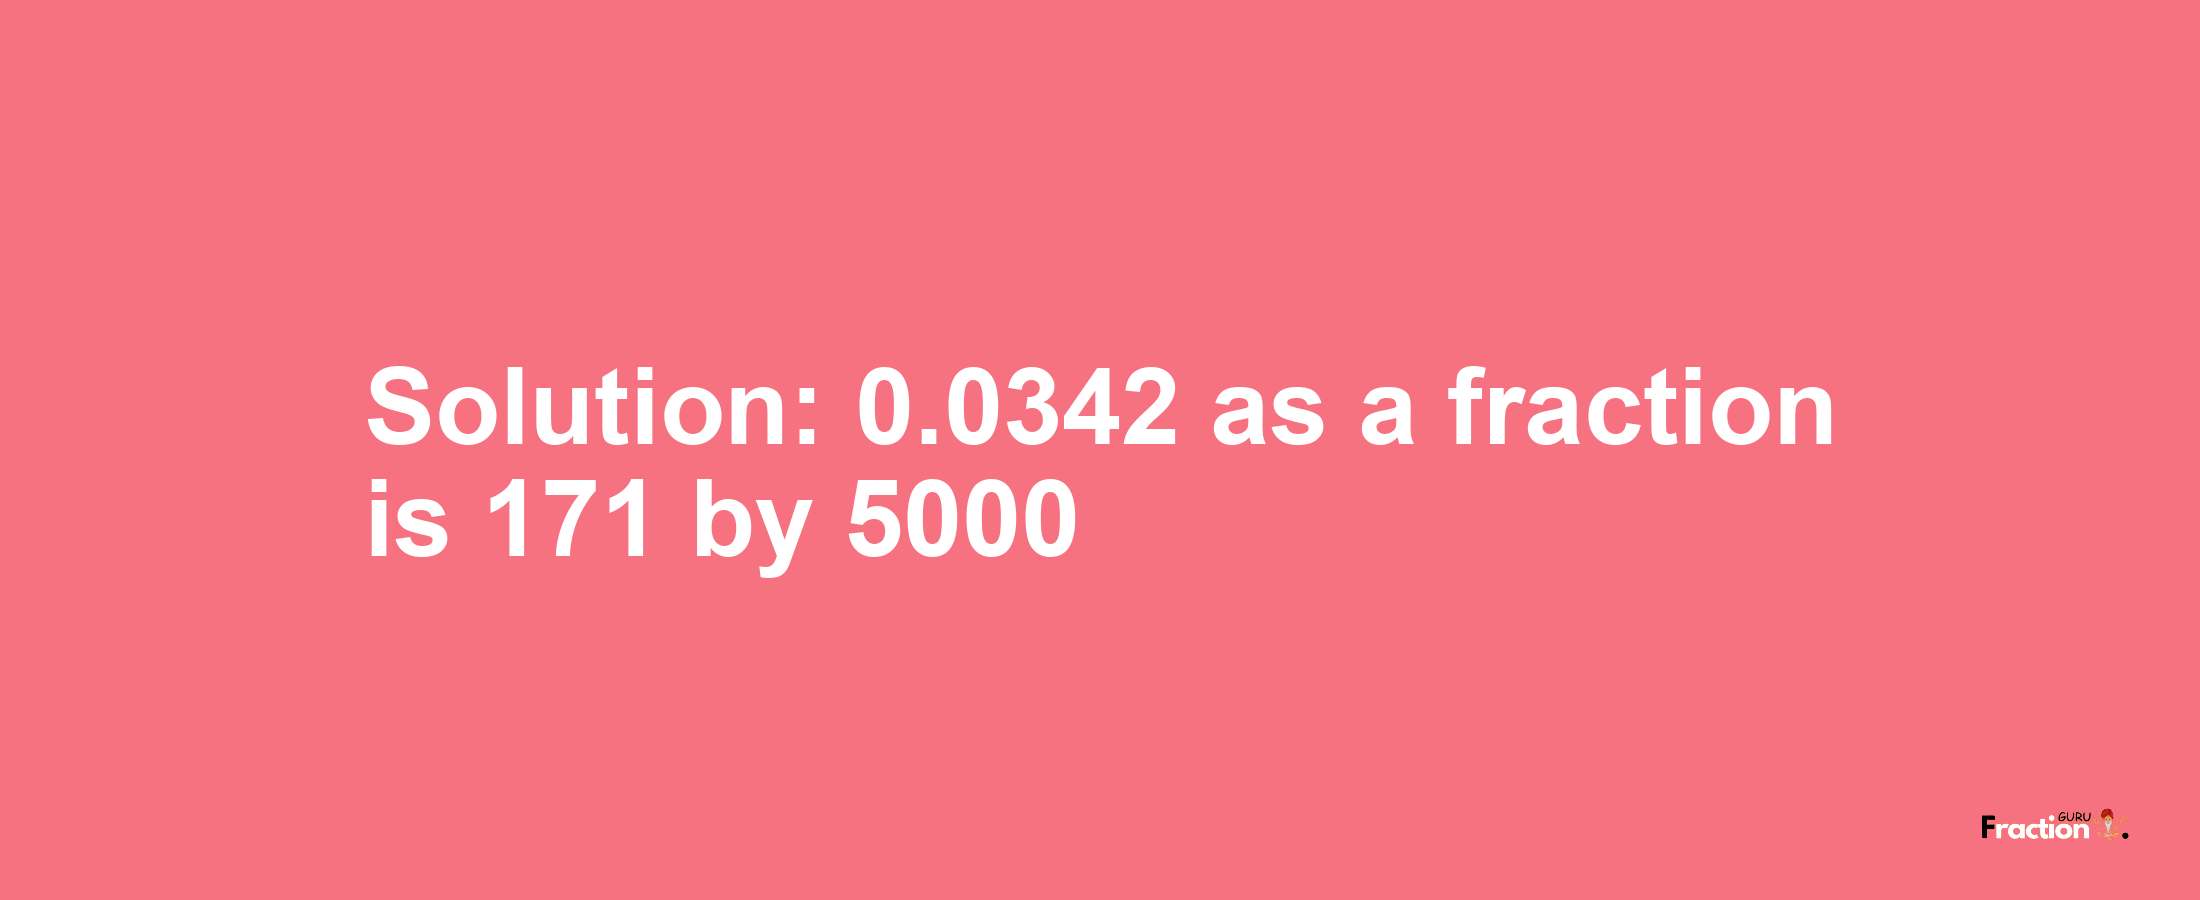 Solution:0.0342 as a fraction is 171/5000